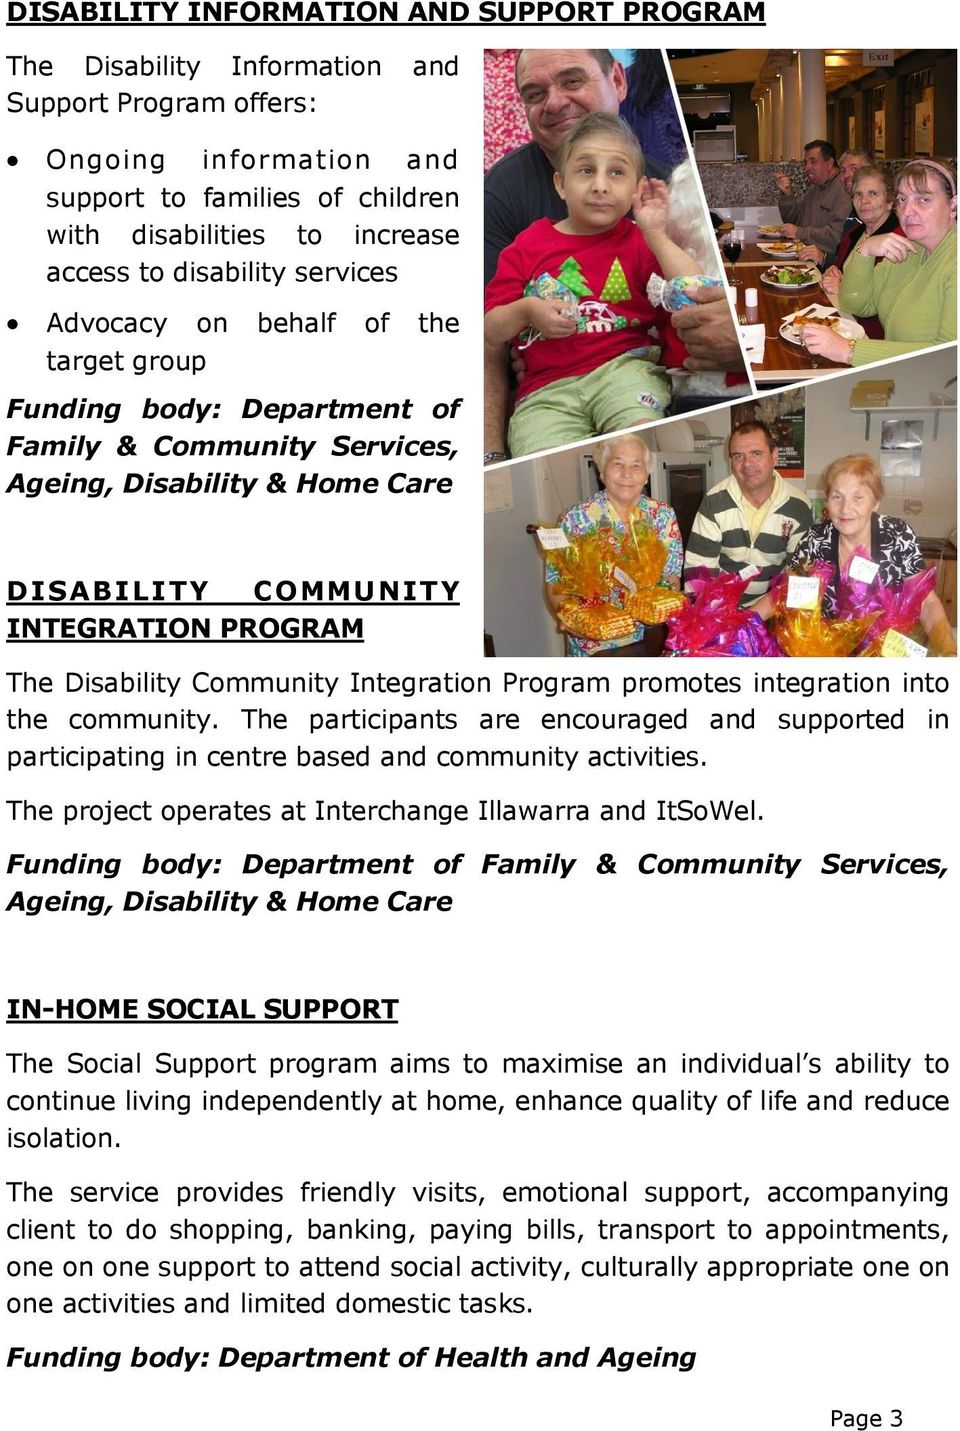 Disability Community Integration Program promotes integration into the community. The participants are encouraged and supported in participating in centre based and community activities.